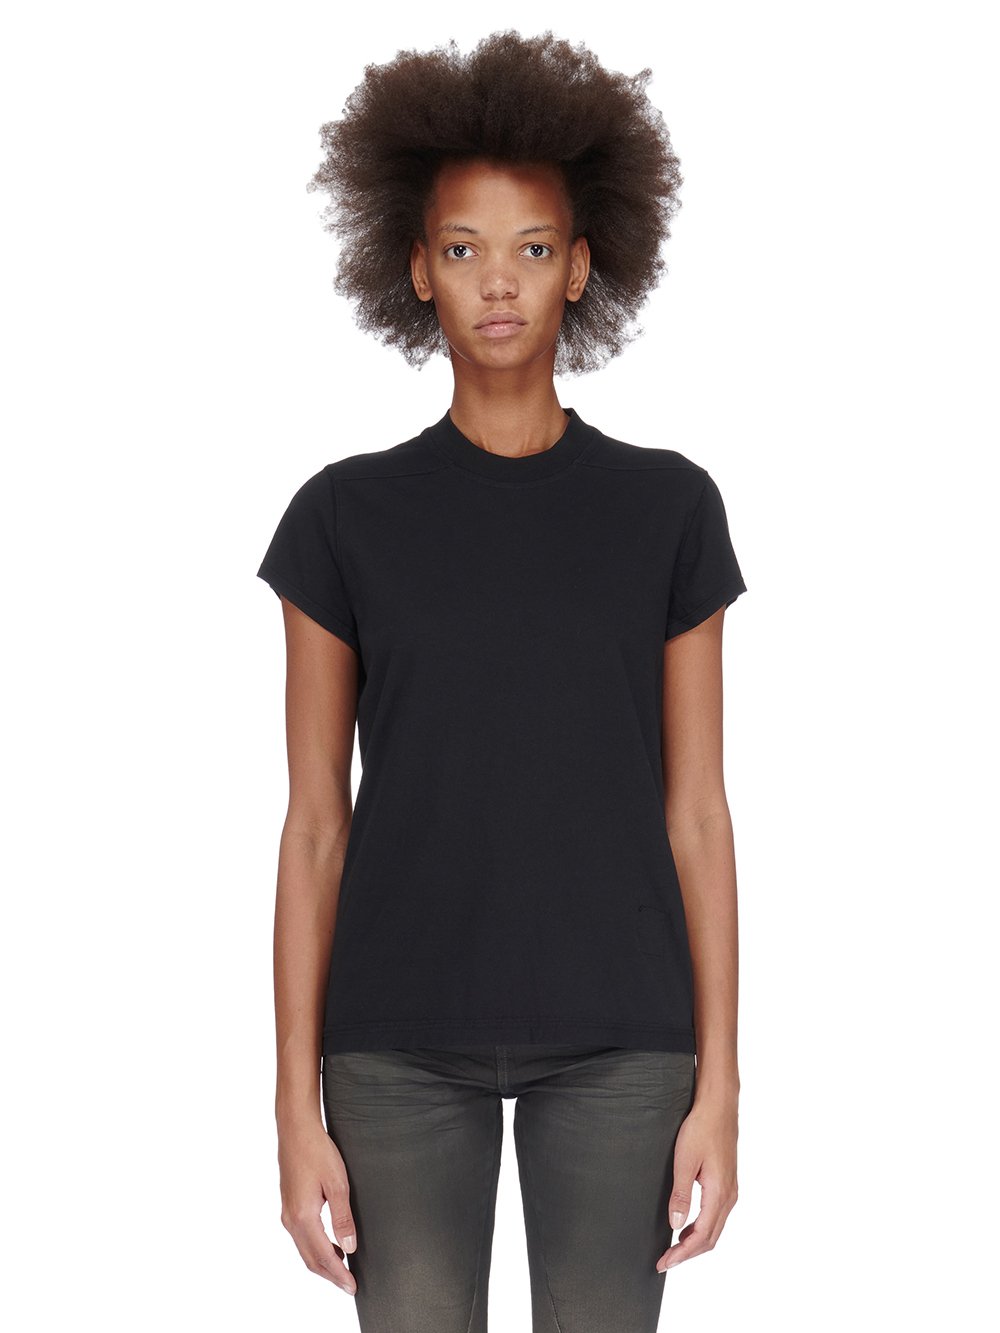 DRKSHDW FW23 LUXOR SMALL LEVEL T IN BLACK MEDIUM WEIGHT COTTON JERSEY